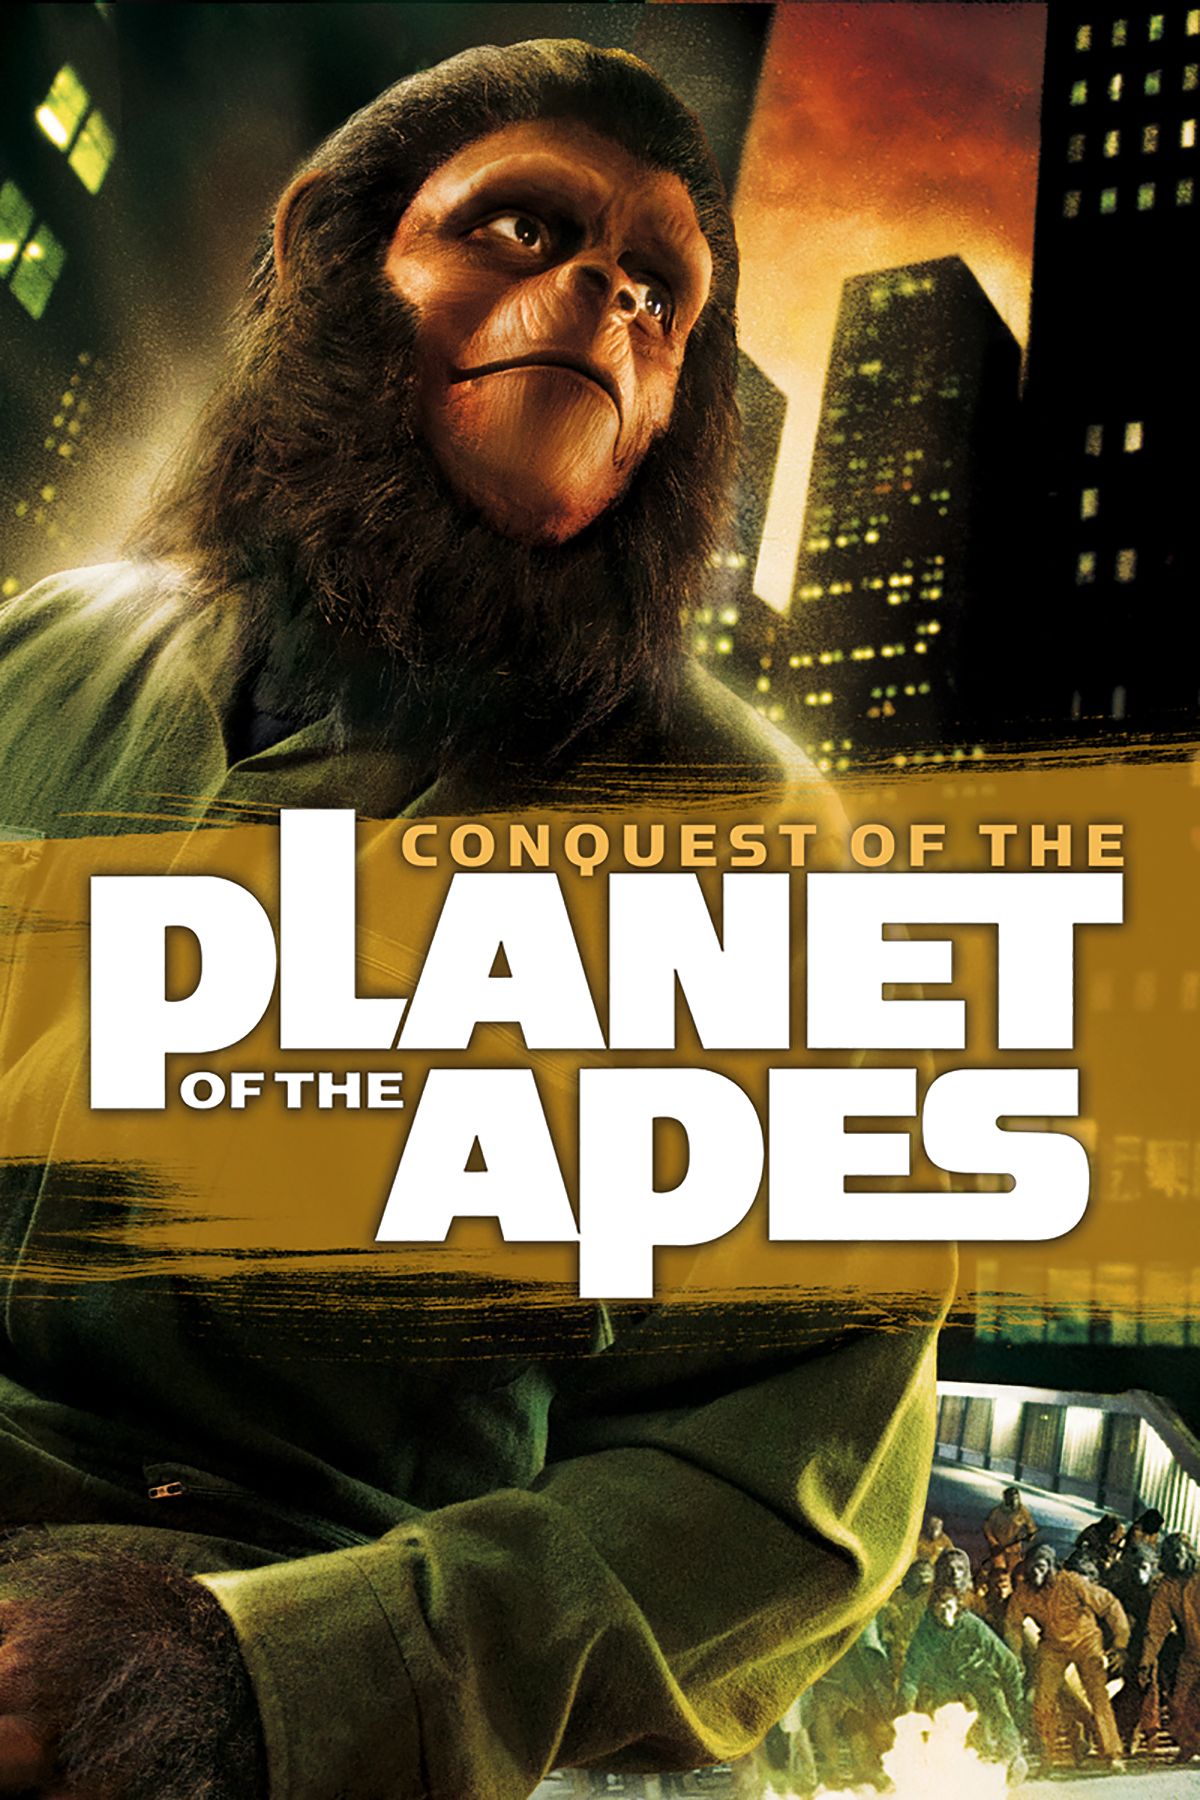 rise of the planet of the apes full movie megashare